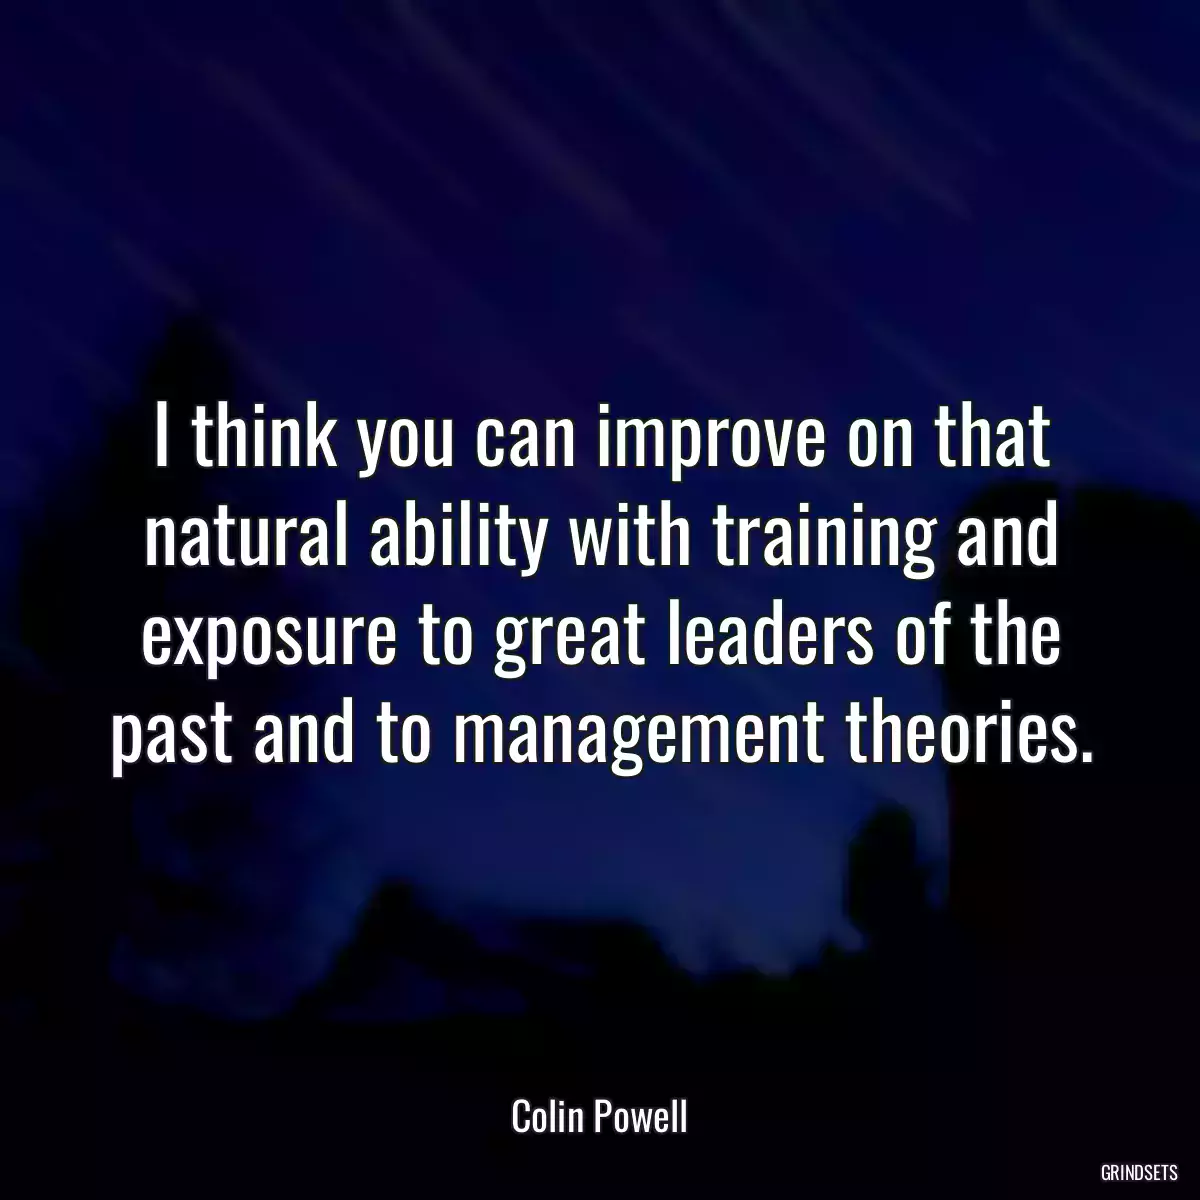 I think you can improve on that natural ability with training and exposure to great leaders of the past and to management theories.